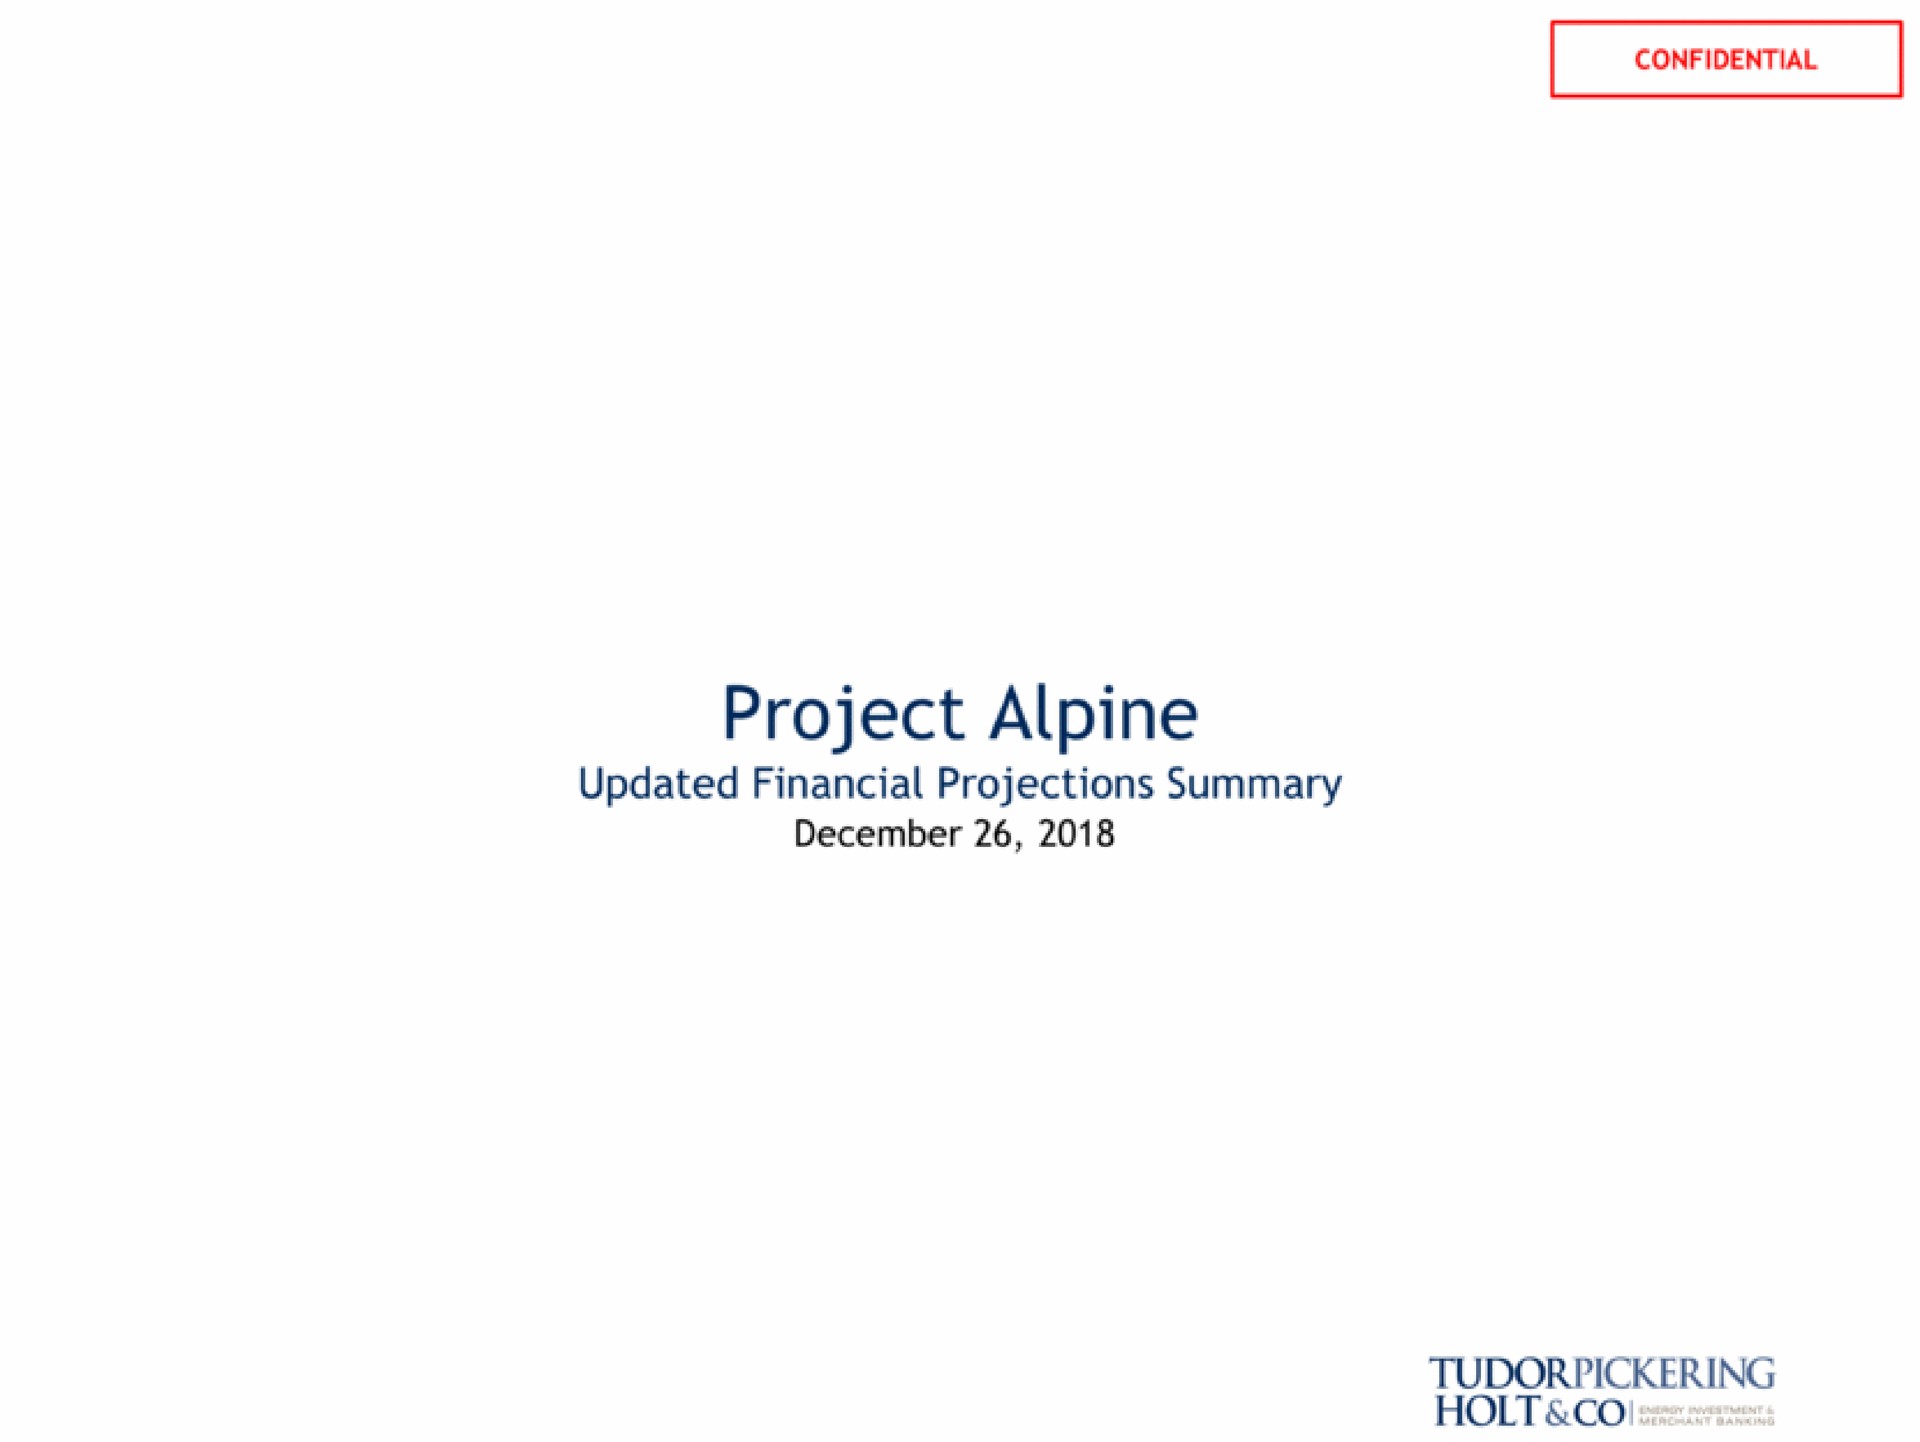 project alpine updated financial projections summary holt | Tudor, Pickering, Holt & Co